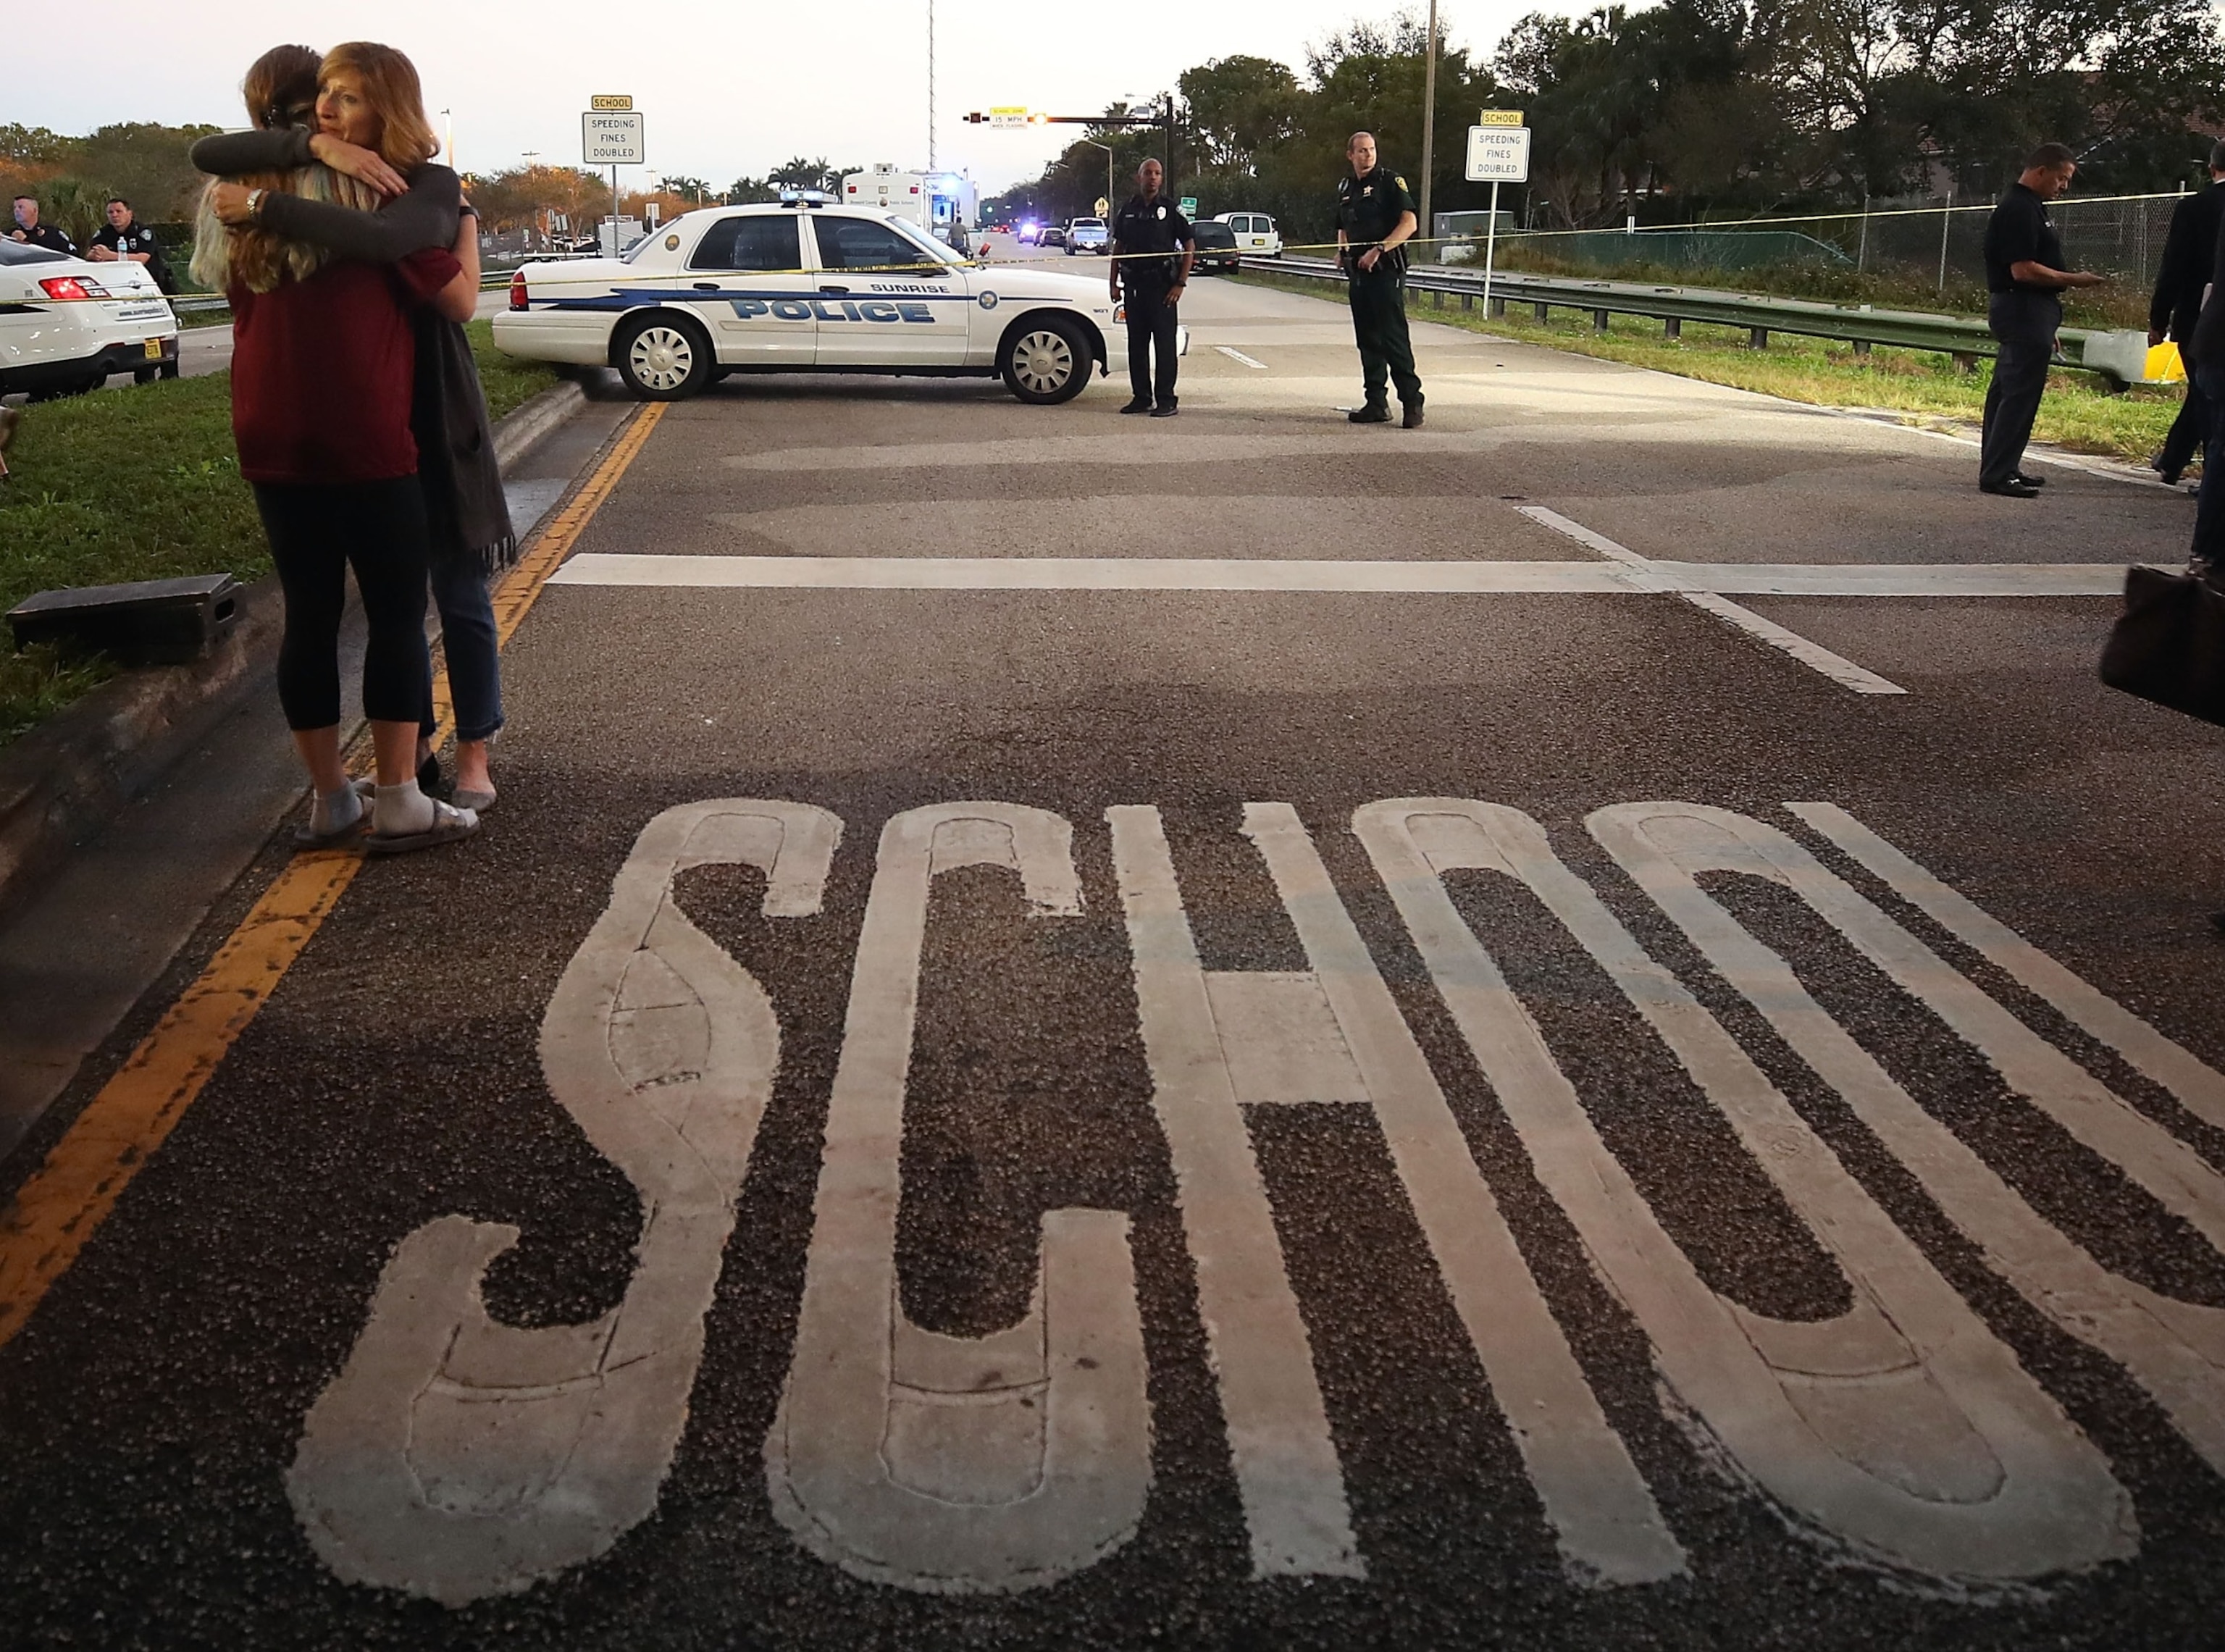 PHOTO: Kristi Gilroy (R), hugs a young woman at a police check point near the Marjory Stoneman Douglas High School where 17 people were killed by a gunman yesterday, Feb. 15, 2018, in Parkland, Fla.